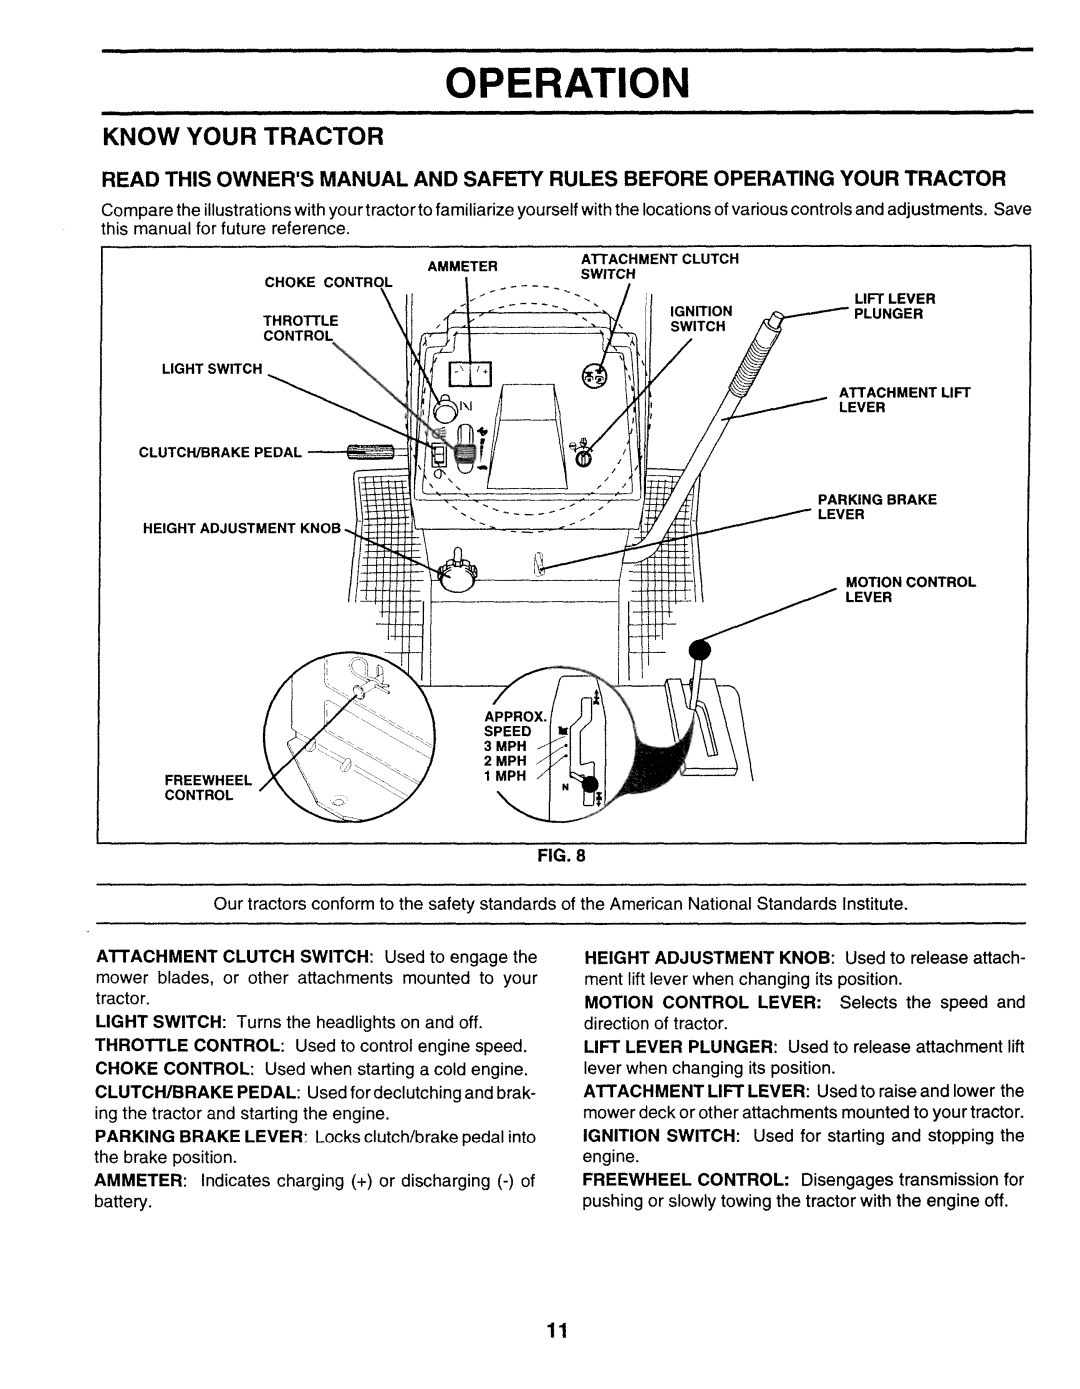 Sears 917.25271 owner manual Operation, Know Your Tractor, tractor, LIGHT SWITCH: Turns the headlights on and off, Fig 